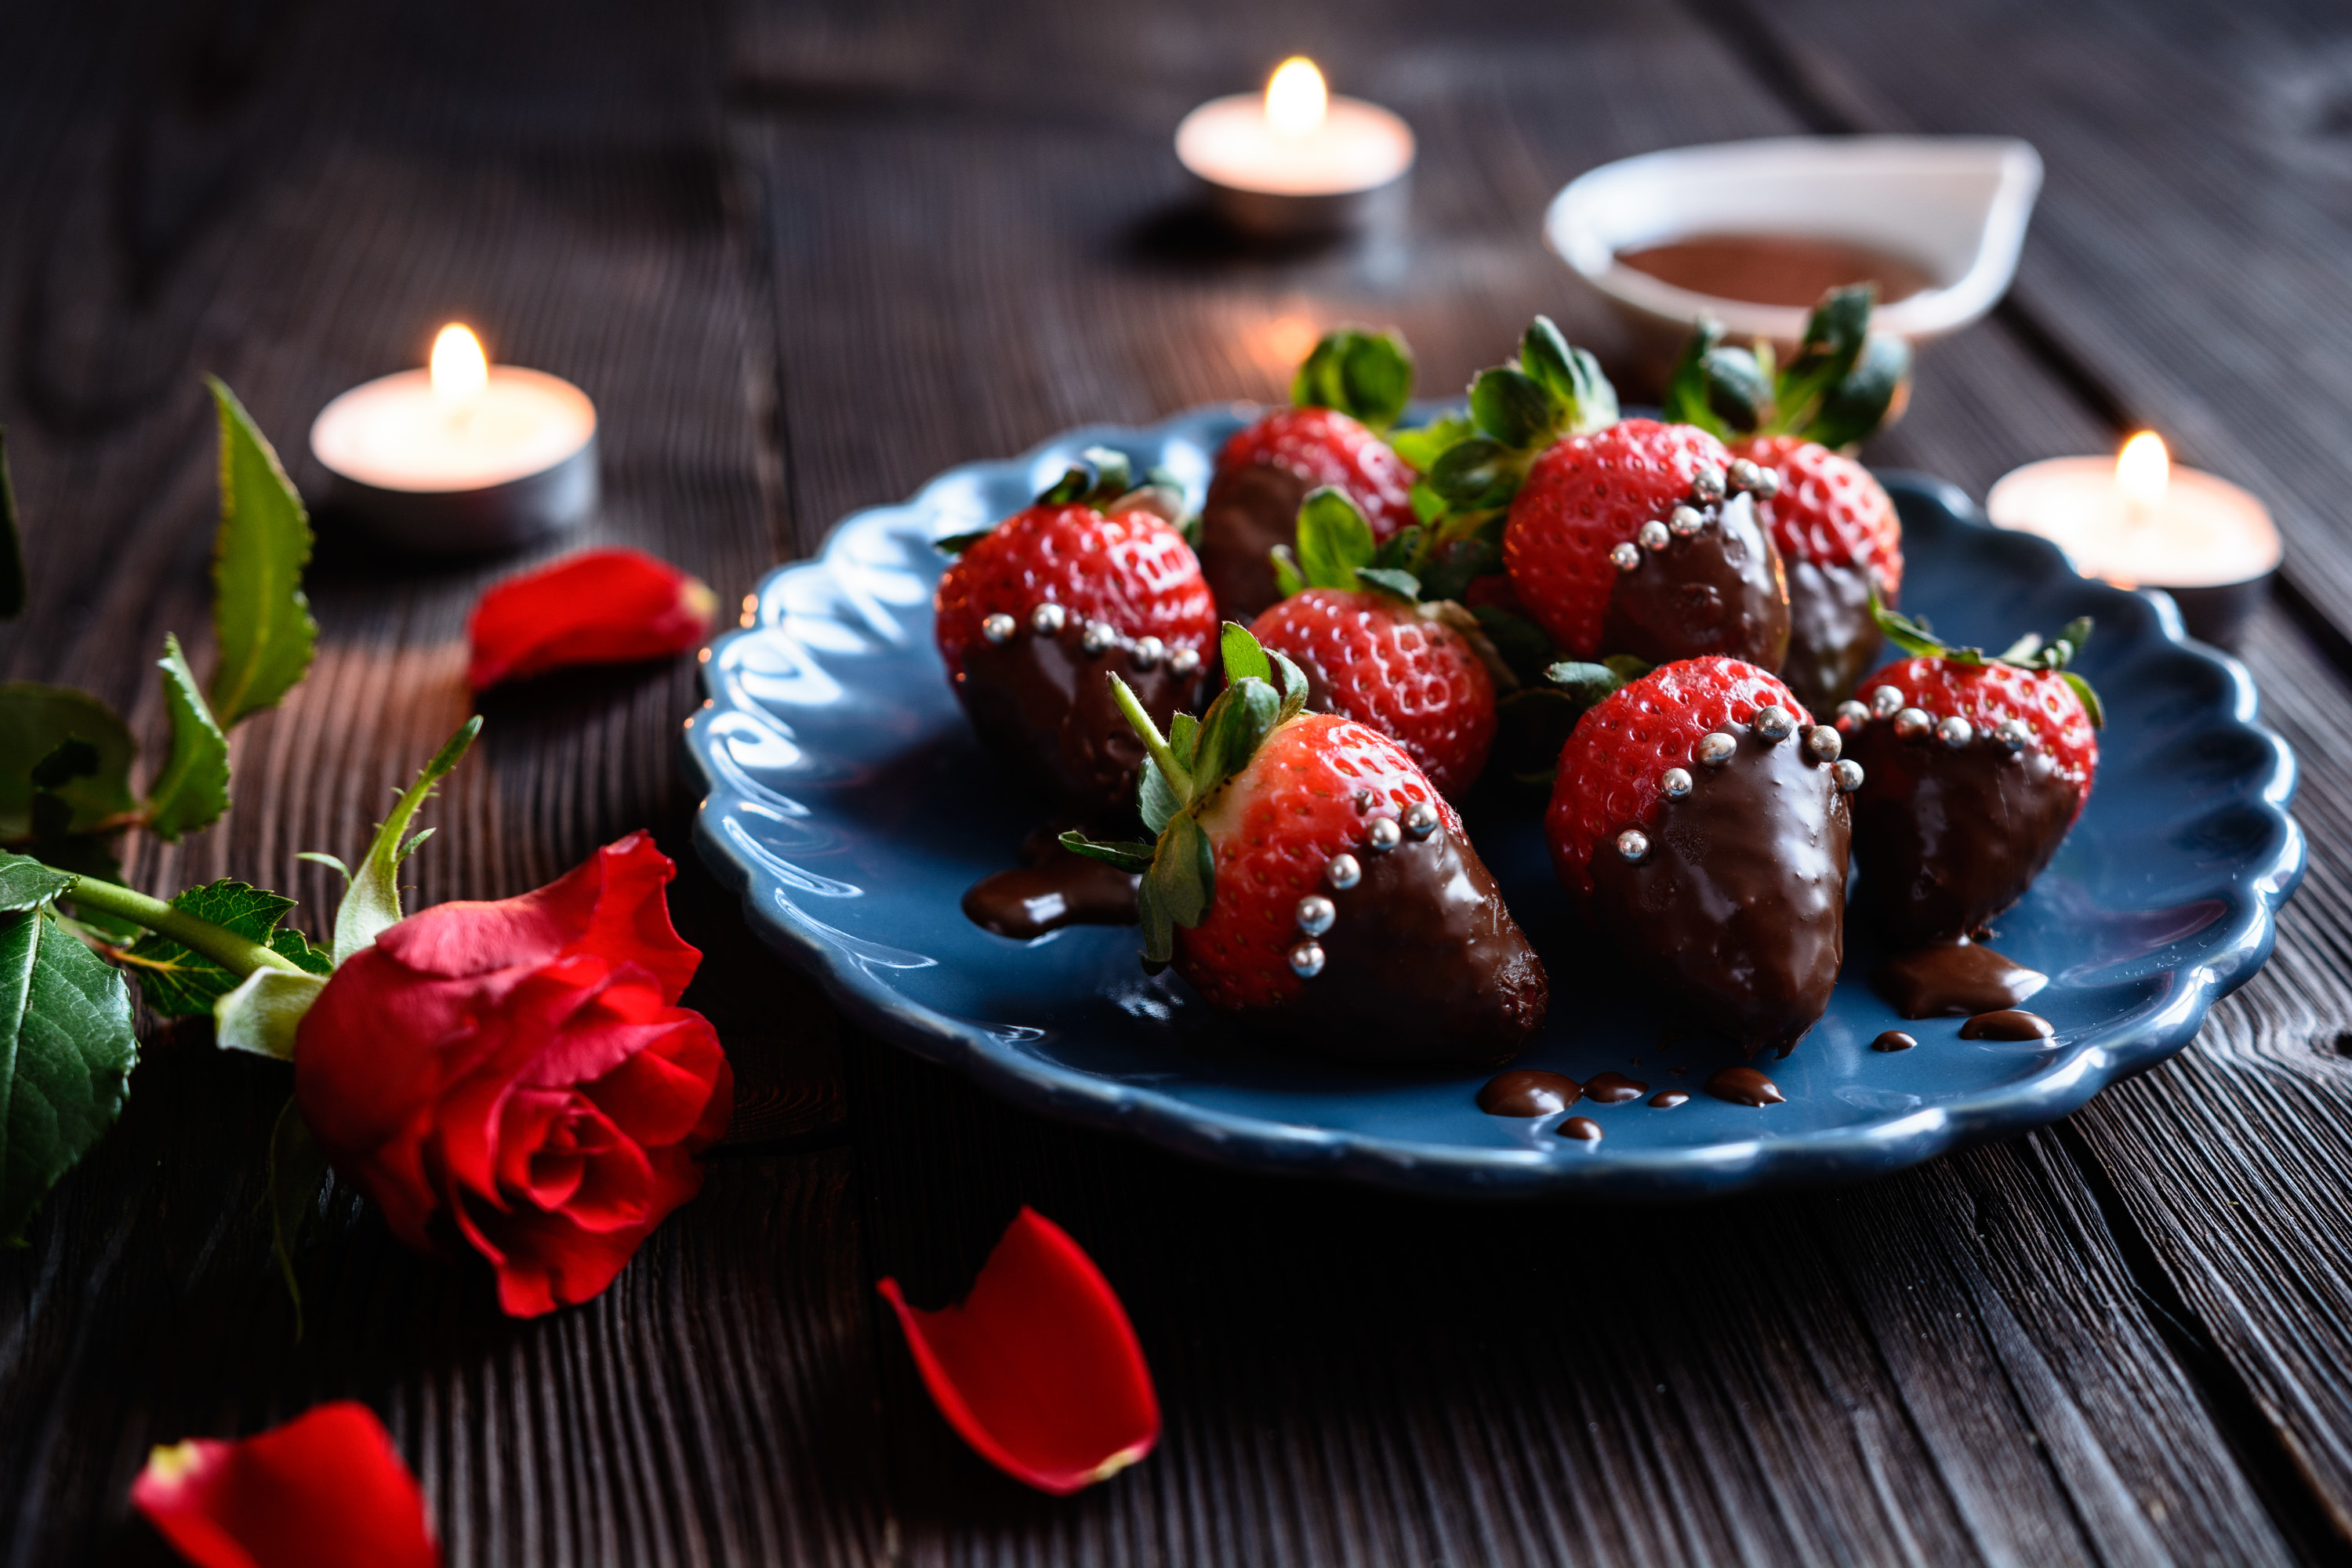 Roses, tea light candles and chocolate covered strawberries on a plate